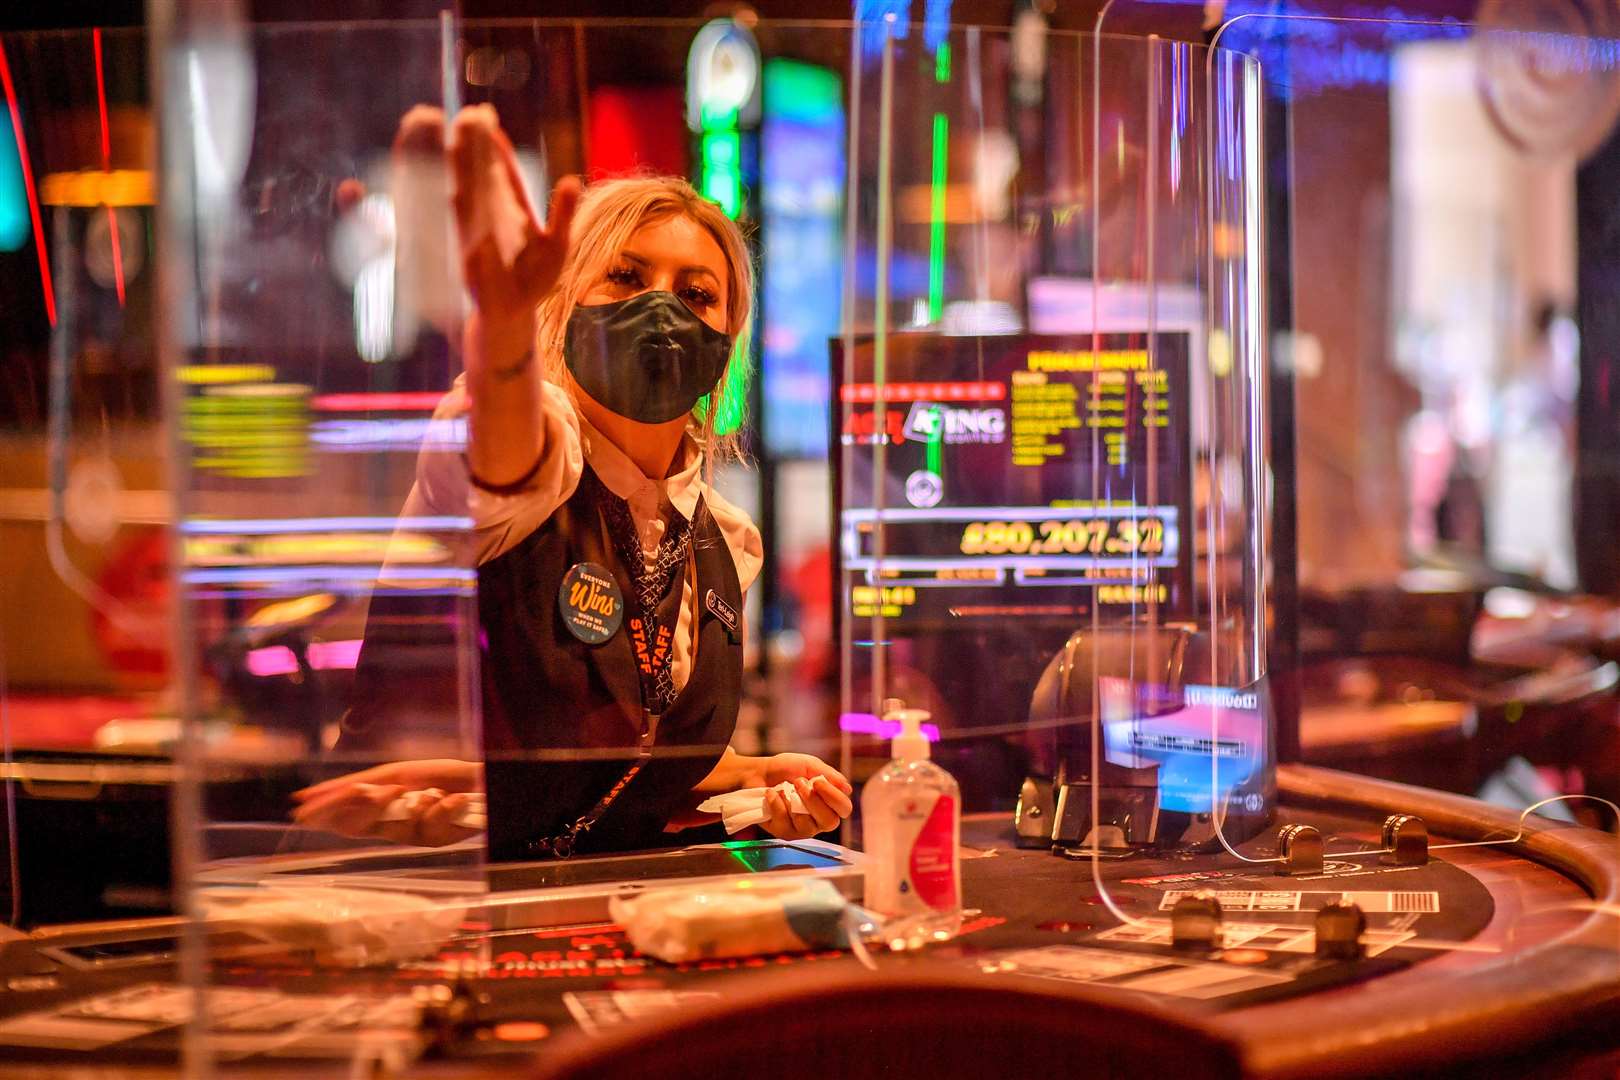 Staff clean clear plastic dividing screens between players and dealers at the Grosvenor Casino in Cardiff (Ben Birchall/PA)